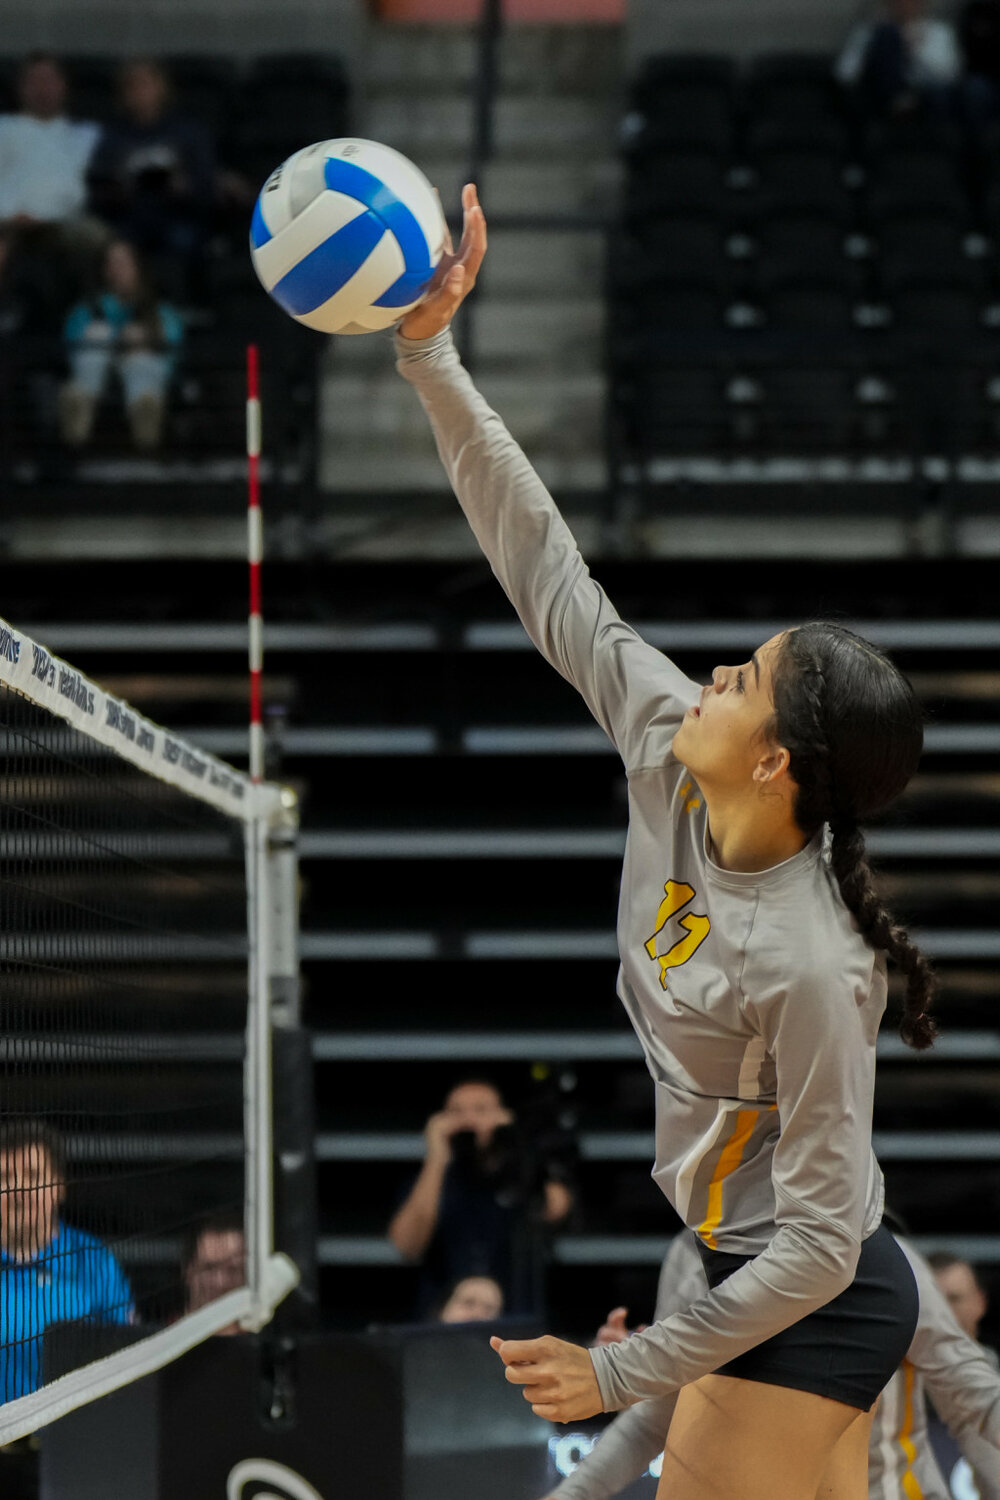 COURTESY OF SDPB
Wolsey-Wessington’s Samara Clemente spikes the ball during Thursday’s match at the Class B State Volleyball Tournament in Summit Arena at the Monument in Rapid City.